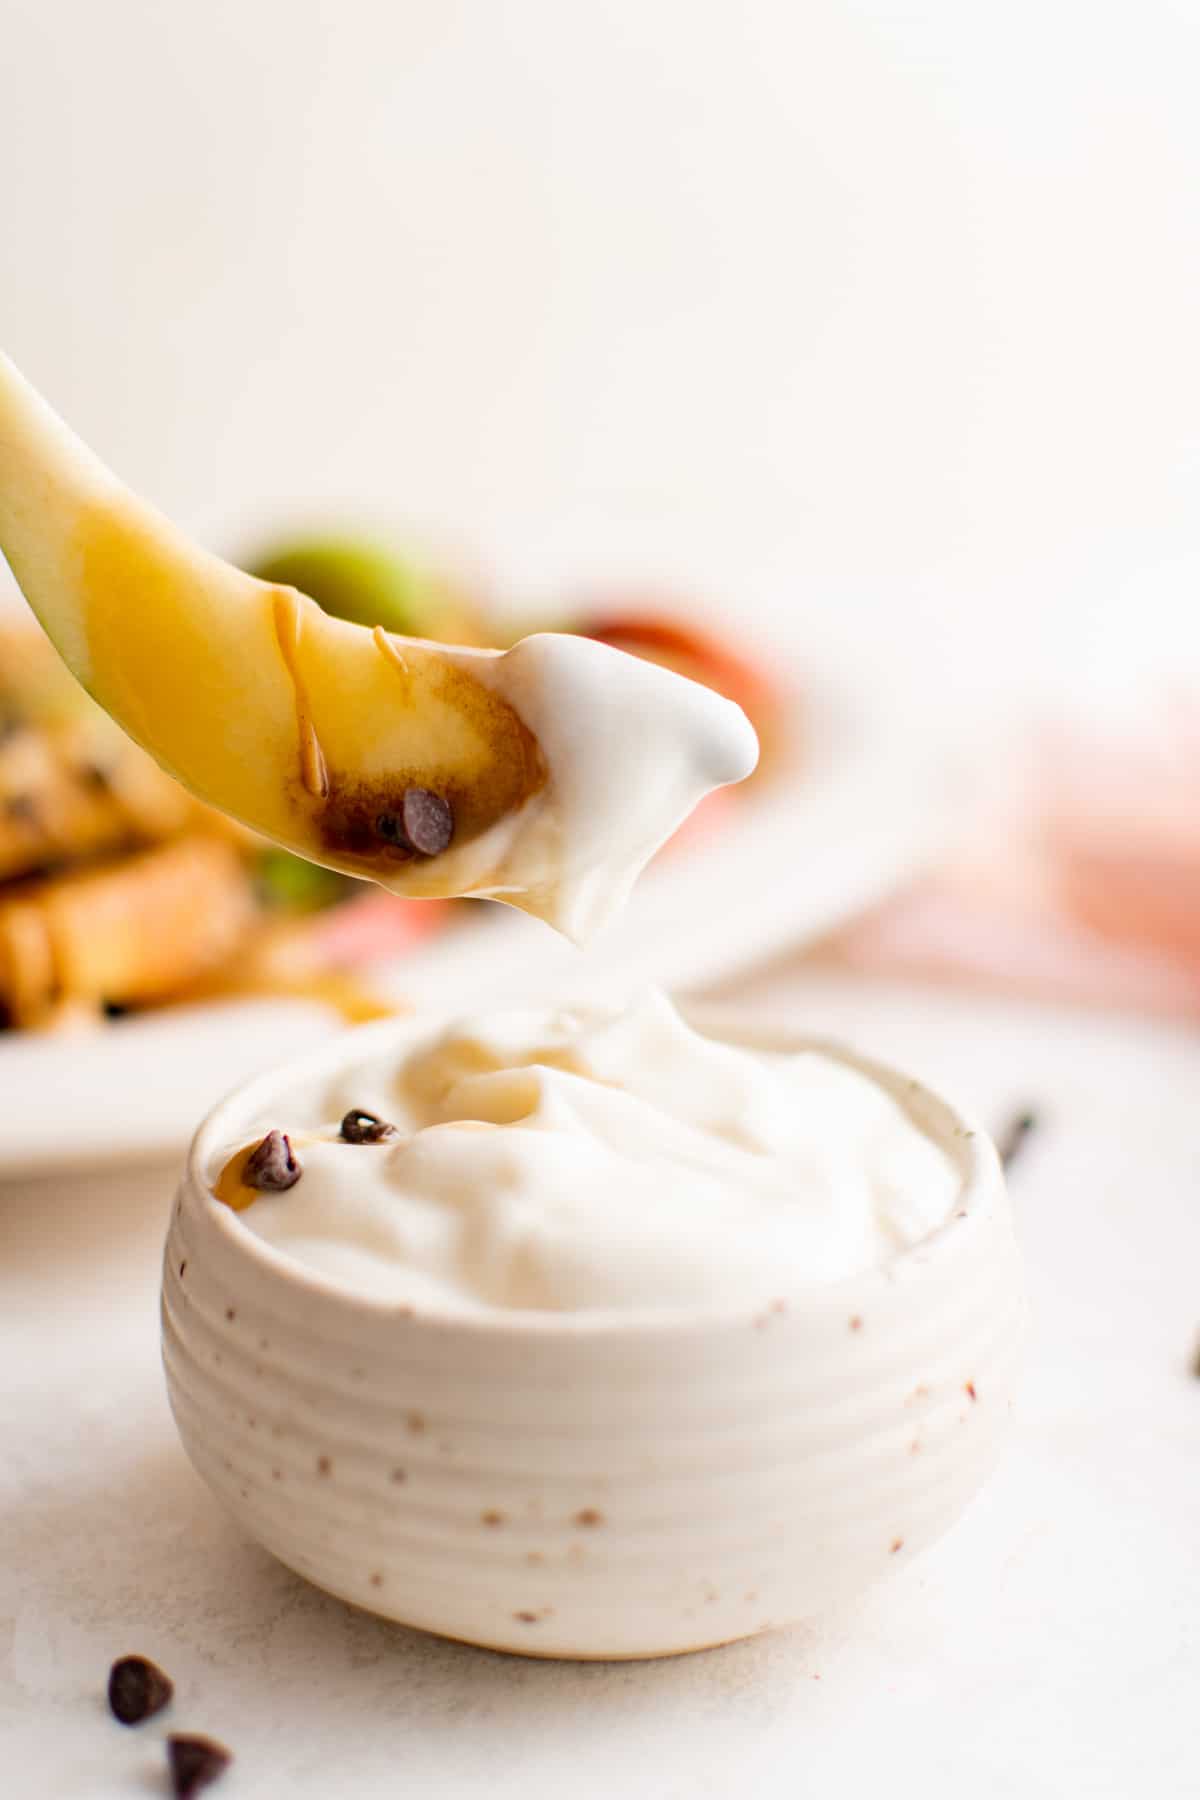 dipping an apple slice in cream cheese fruit dip